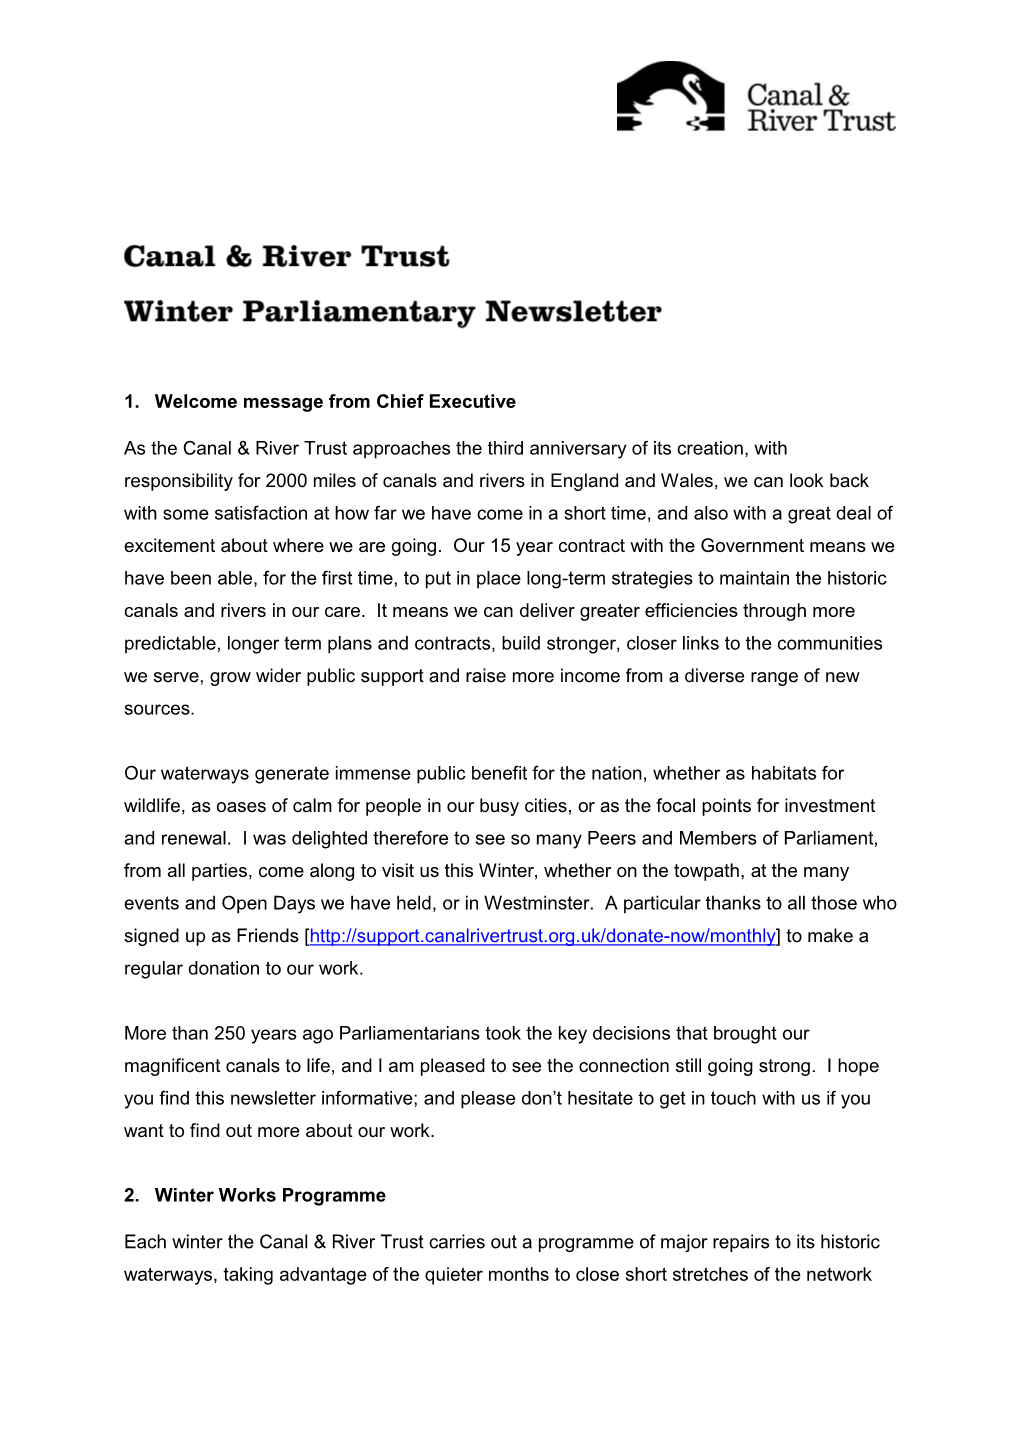 1. Welcome Message from Chief Executive As the Canal & River